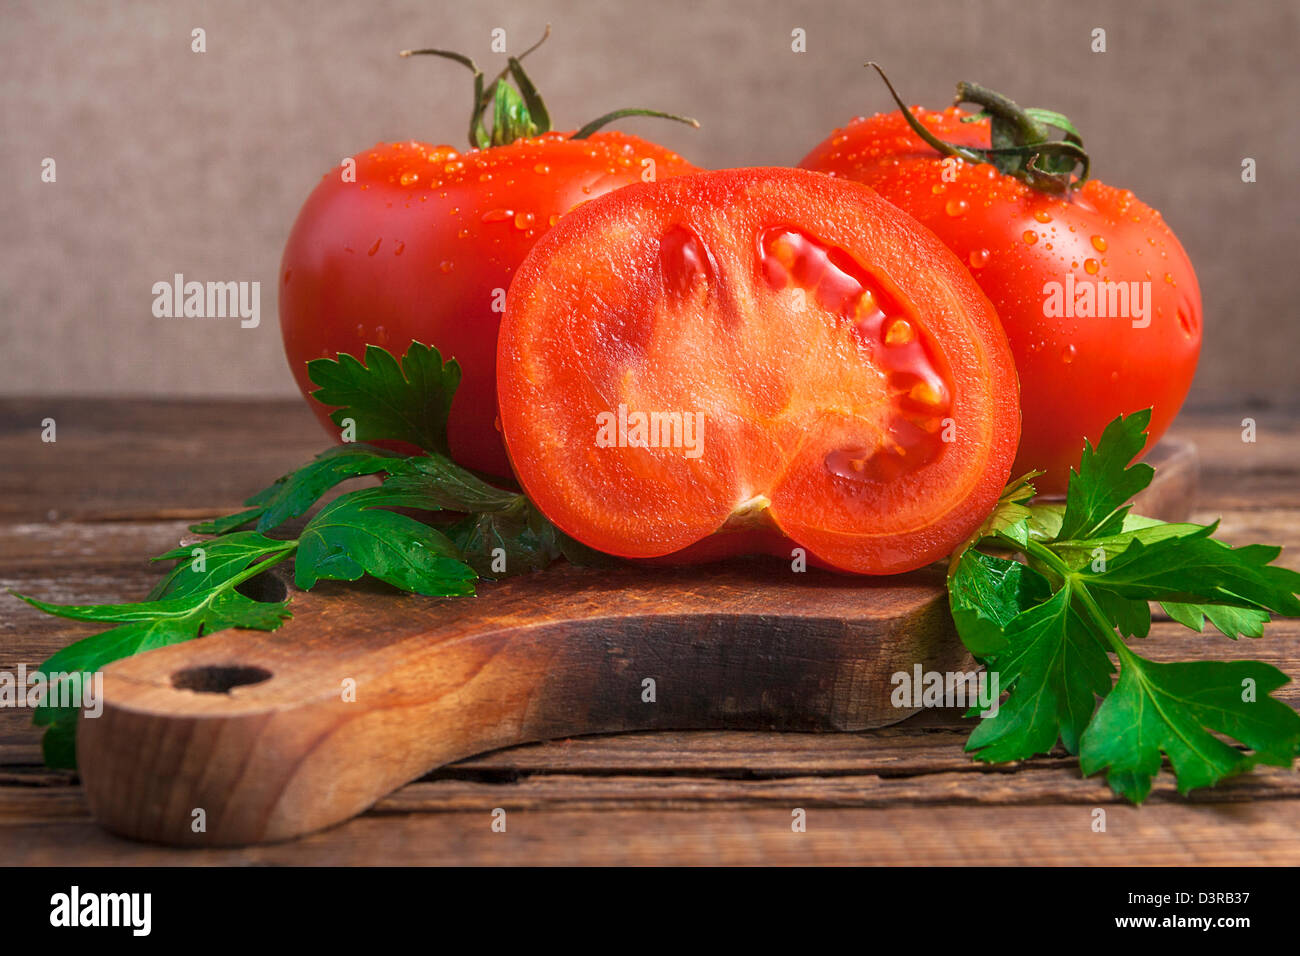 Art vintage composition with tomatos on wooden board Stock Photo